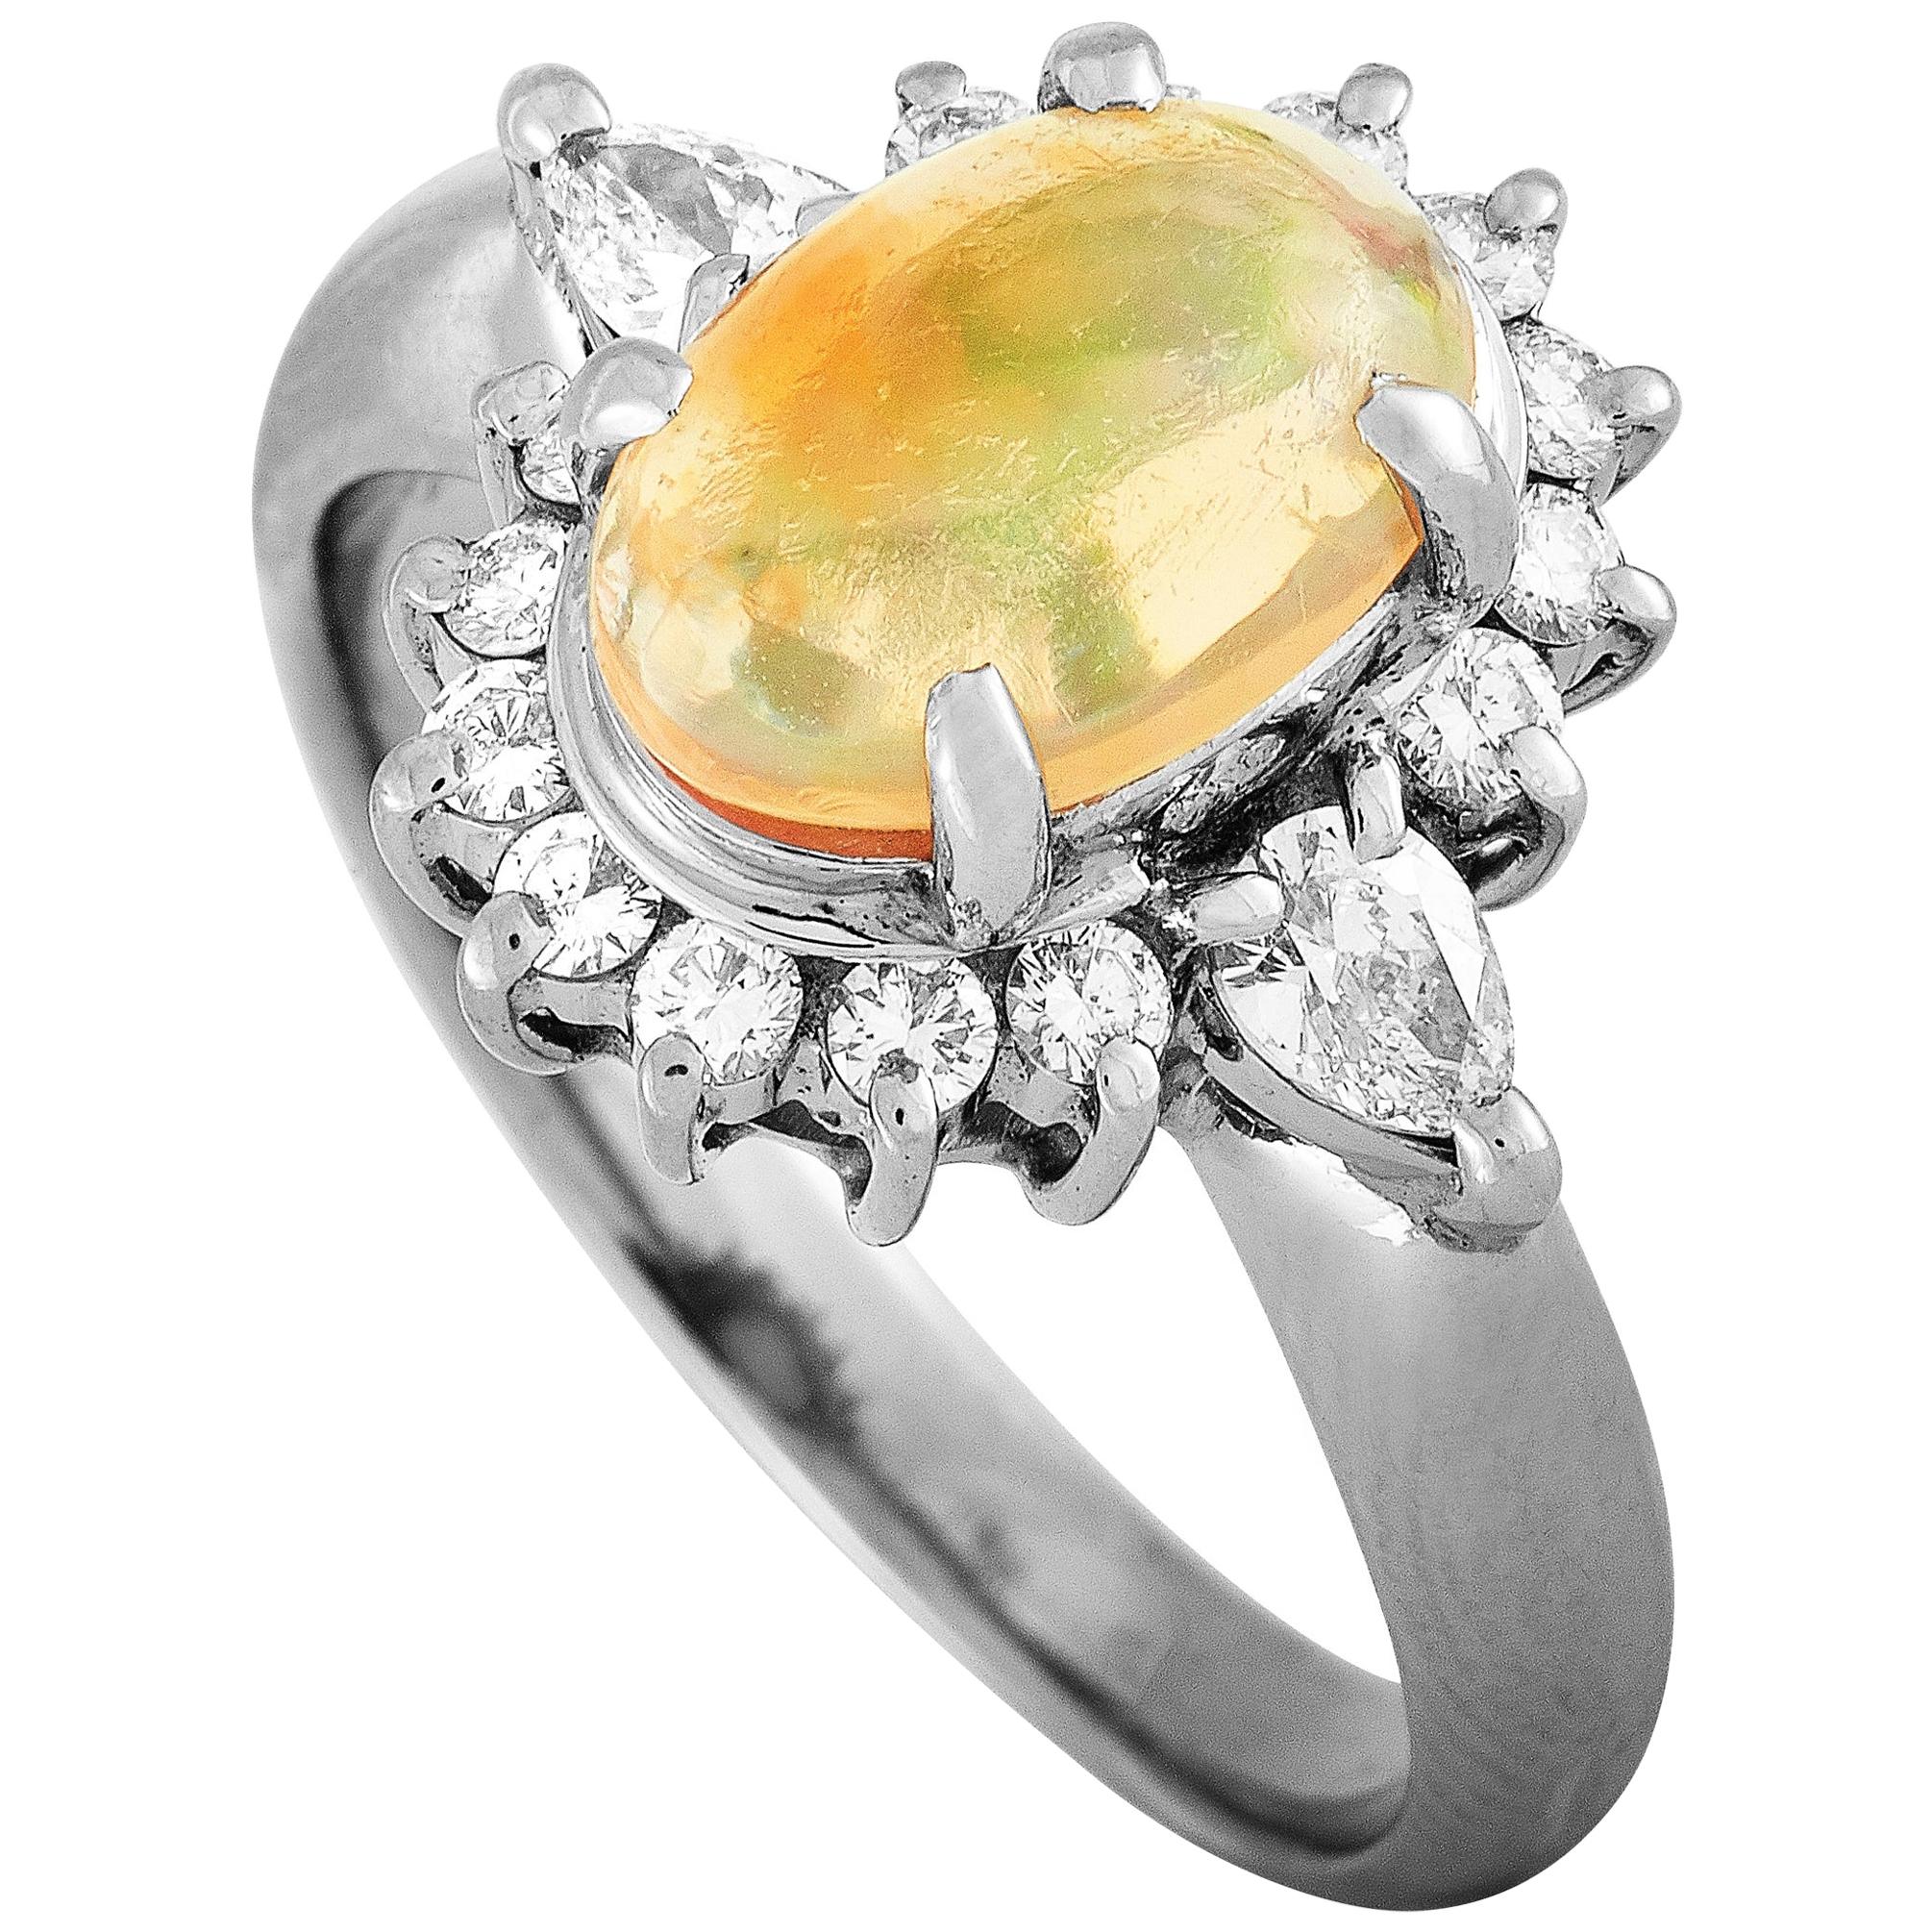 LB Exclusive Platinum 0.54 Carat Round and Pear Diamond and Opal Ring